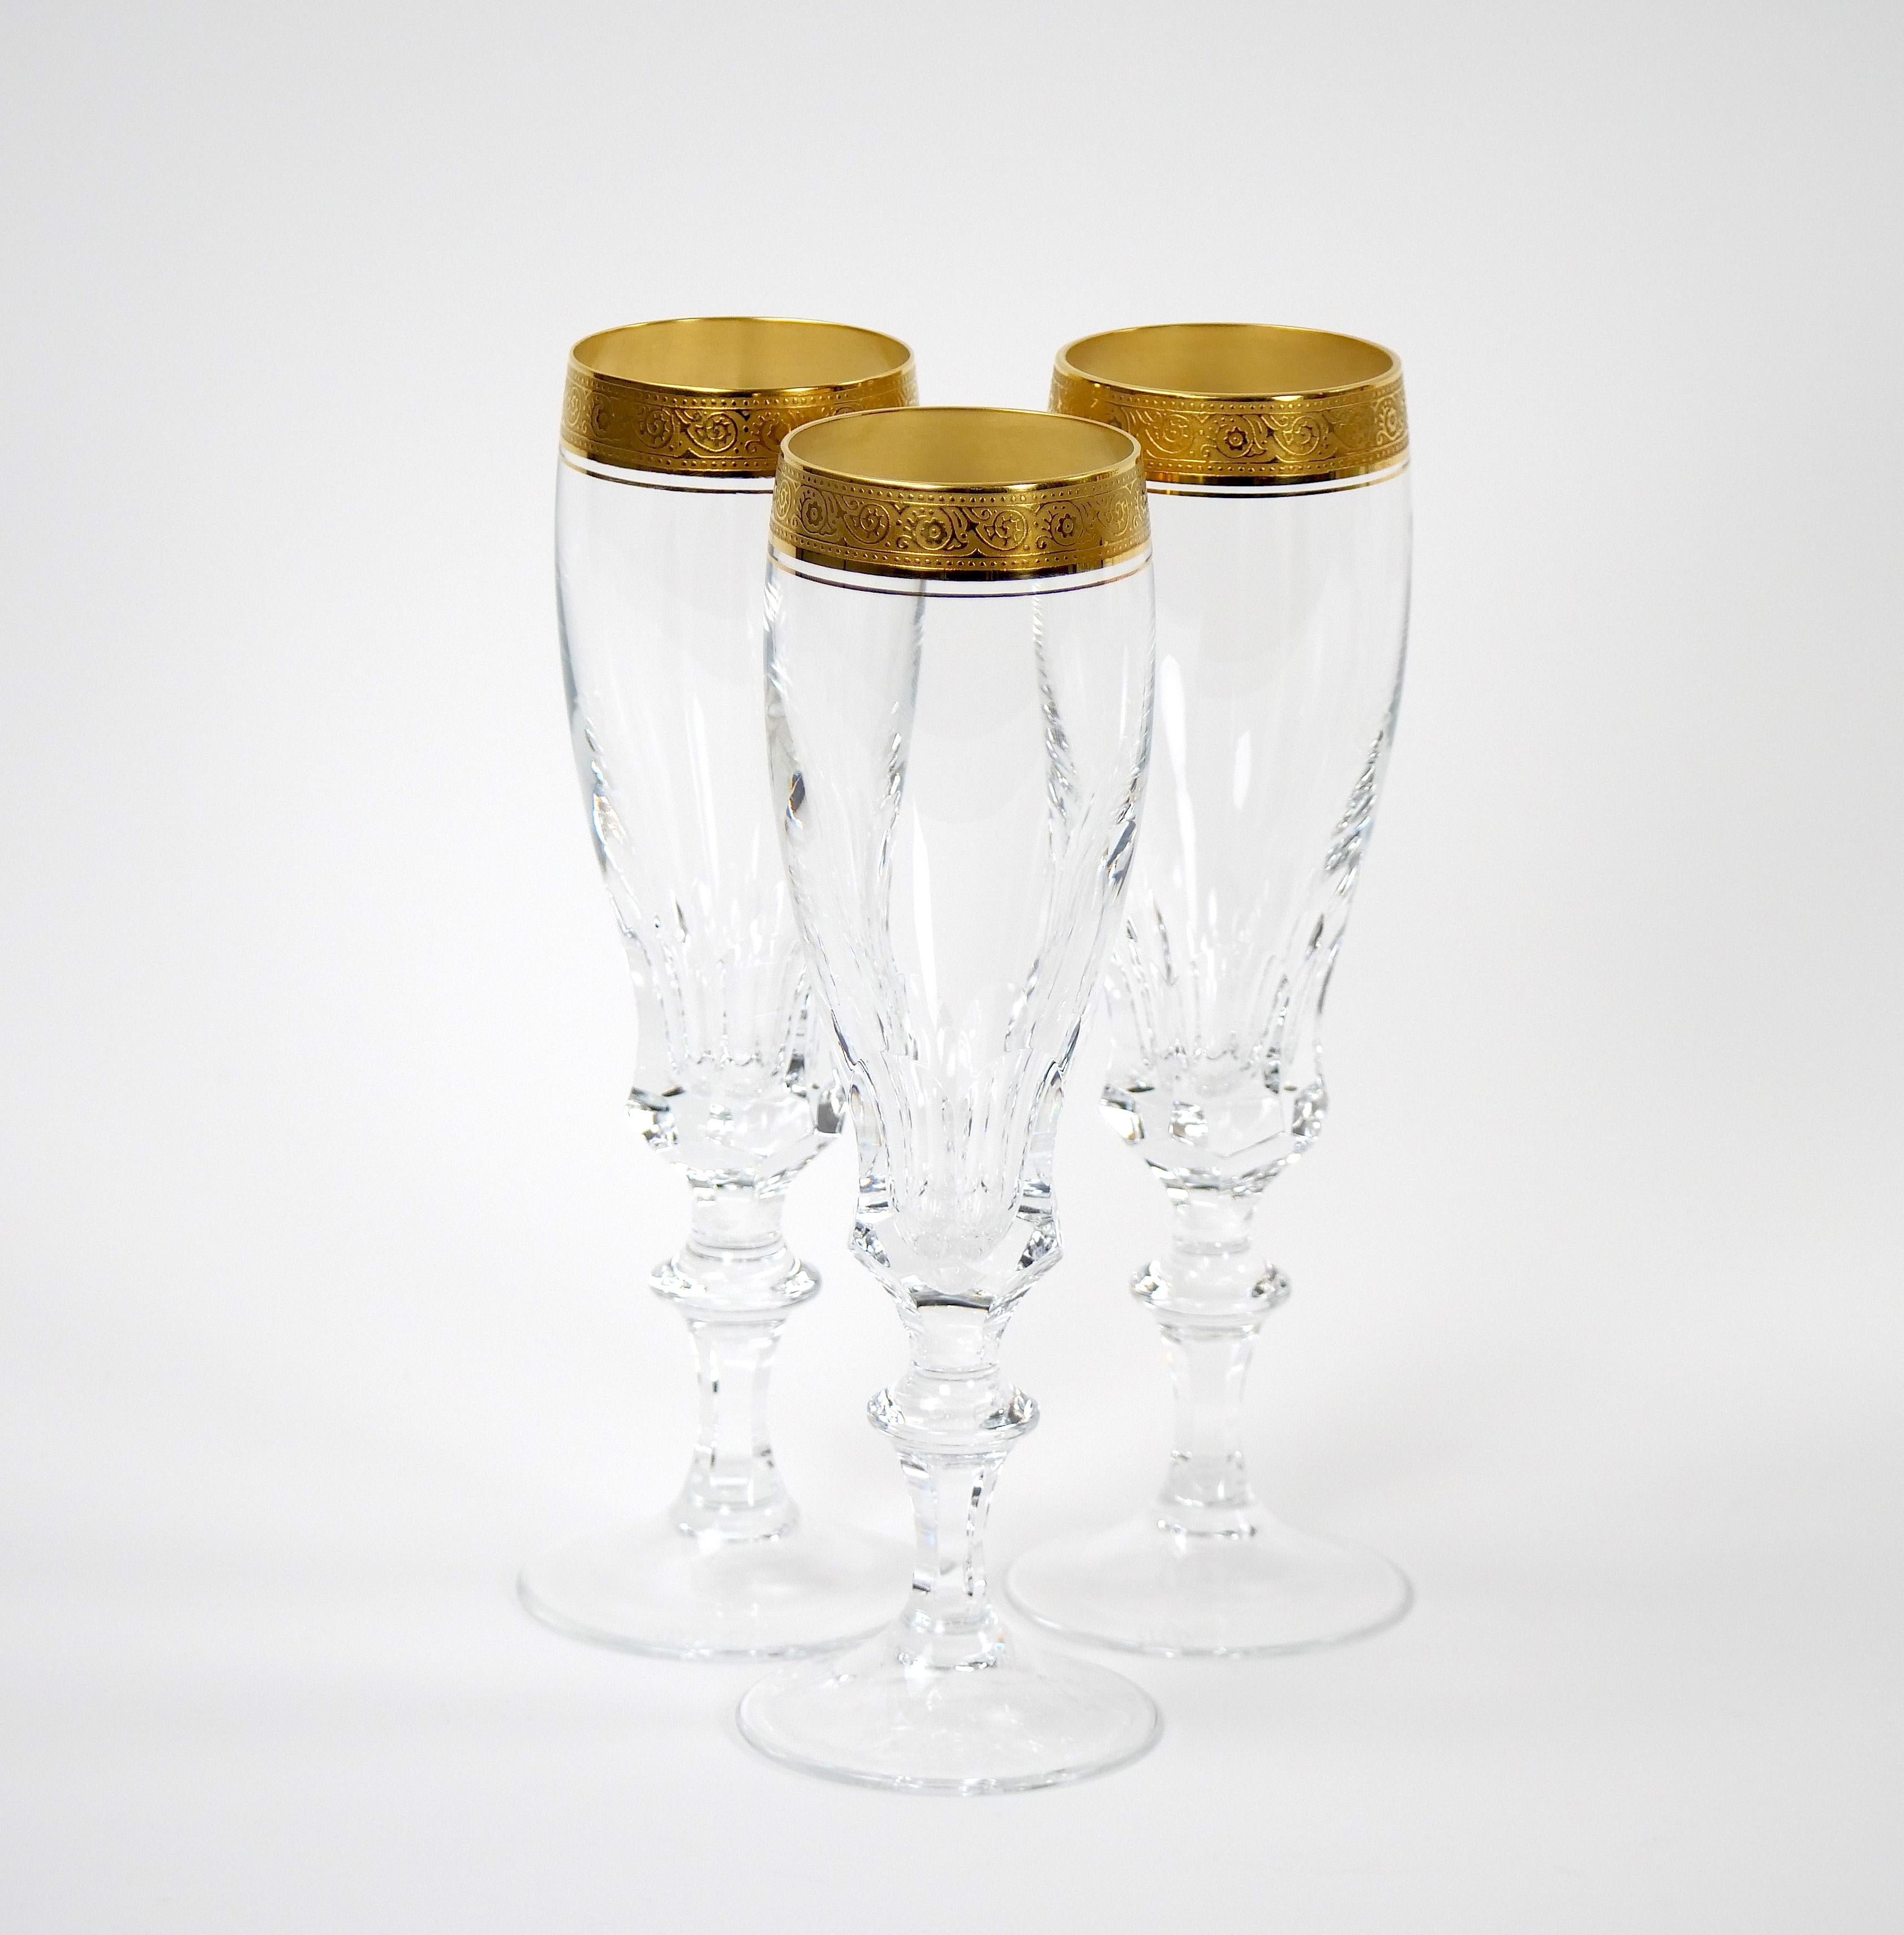 20th Century Cut Crystal Double Trimmed Gilt Gold Decorated Champagne Flute / 8 People For Sale